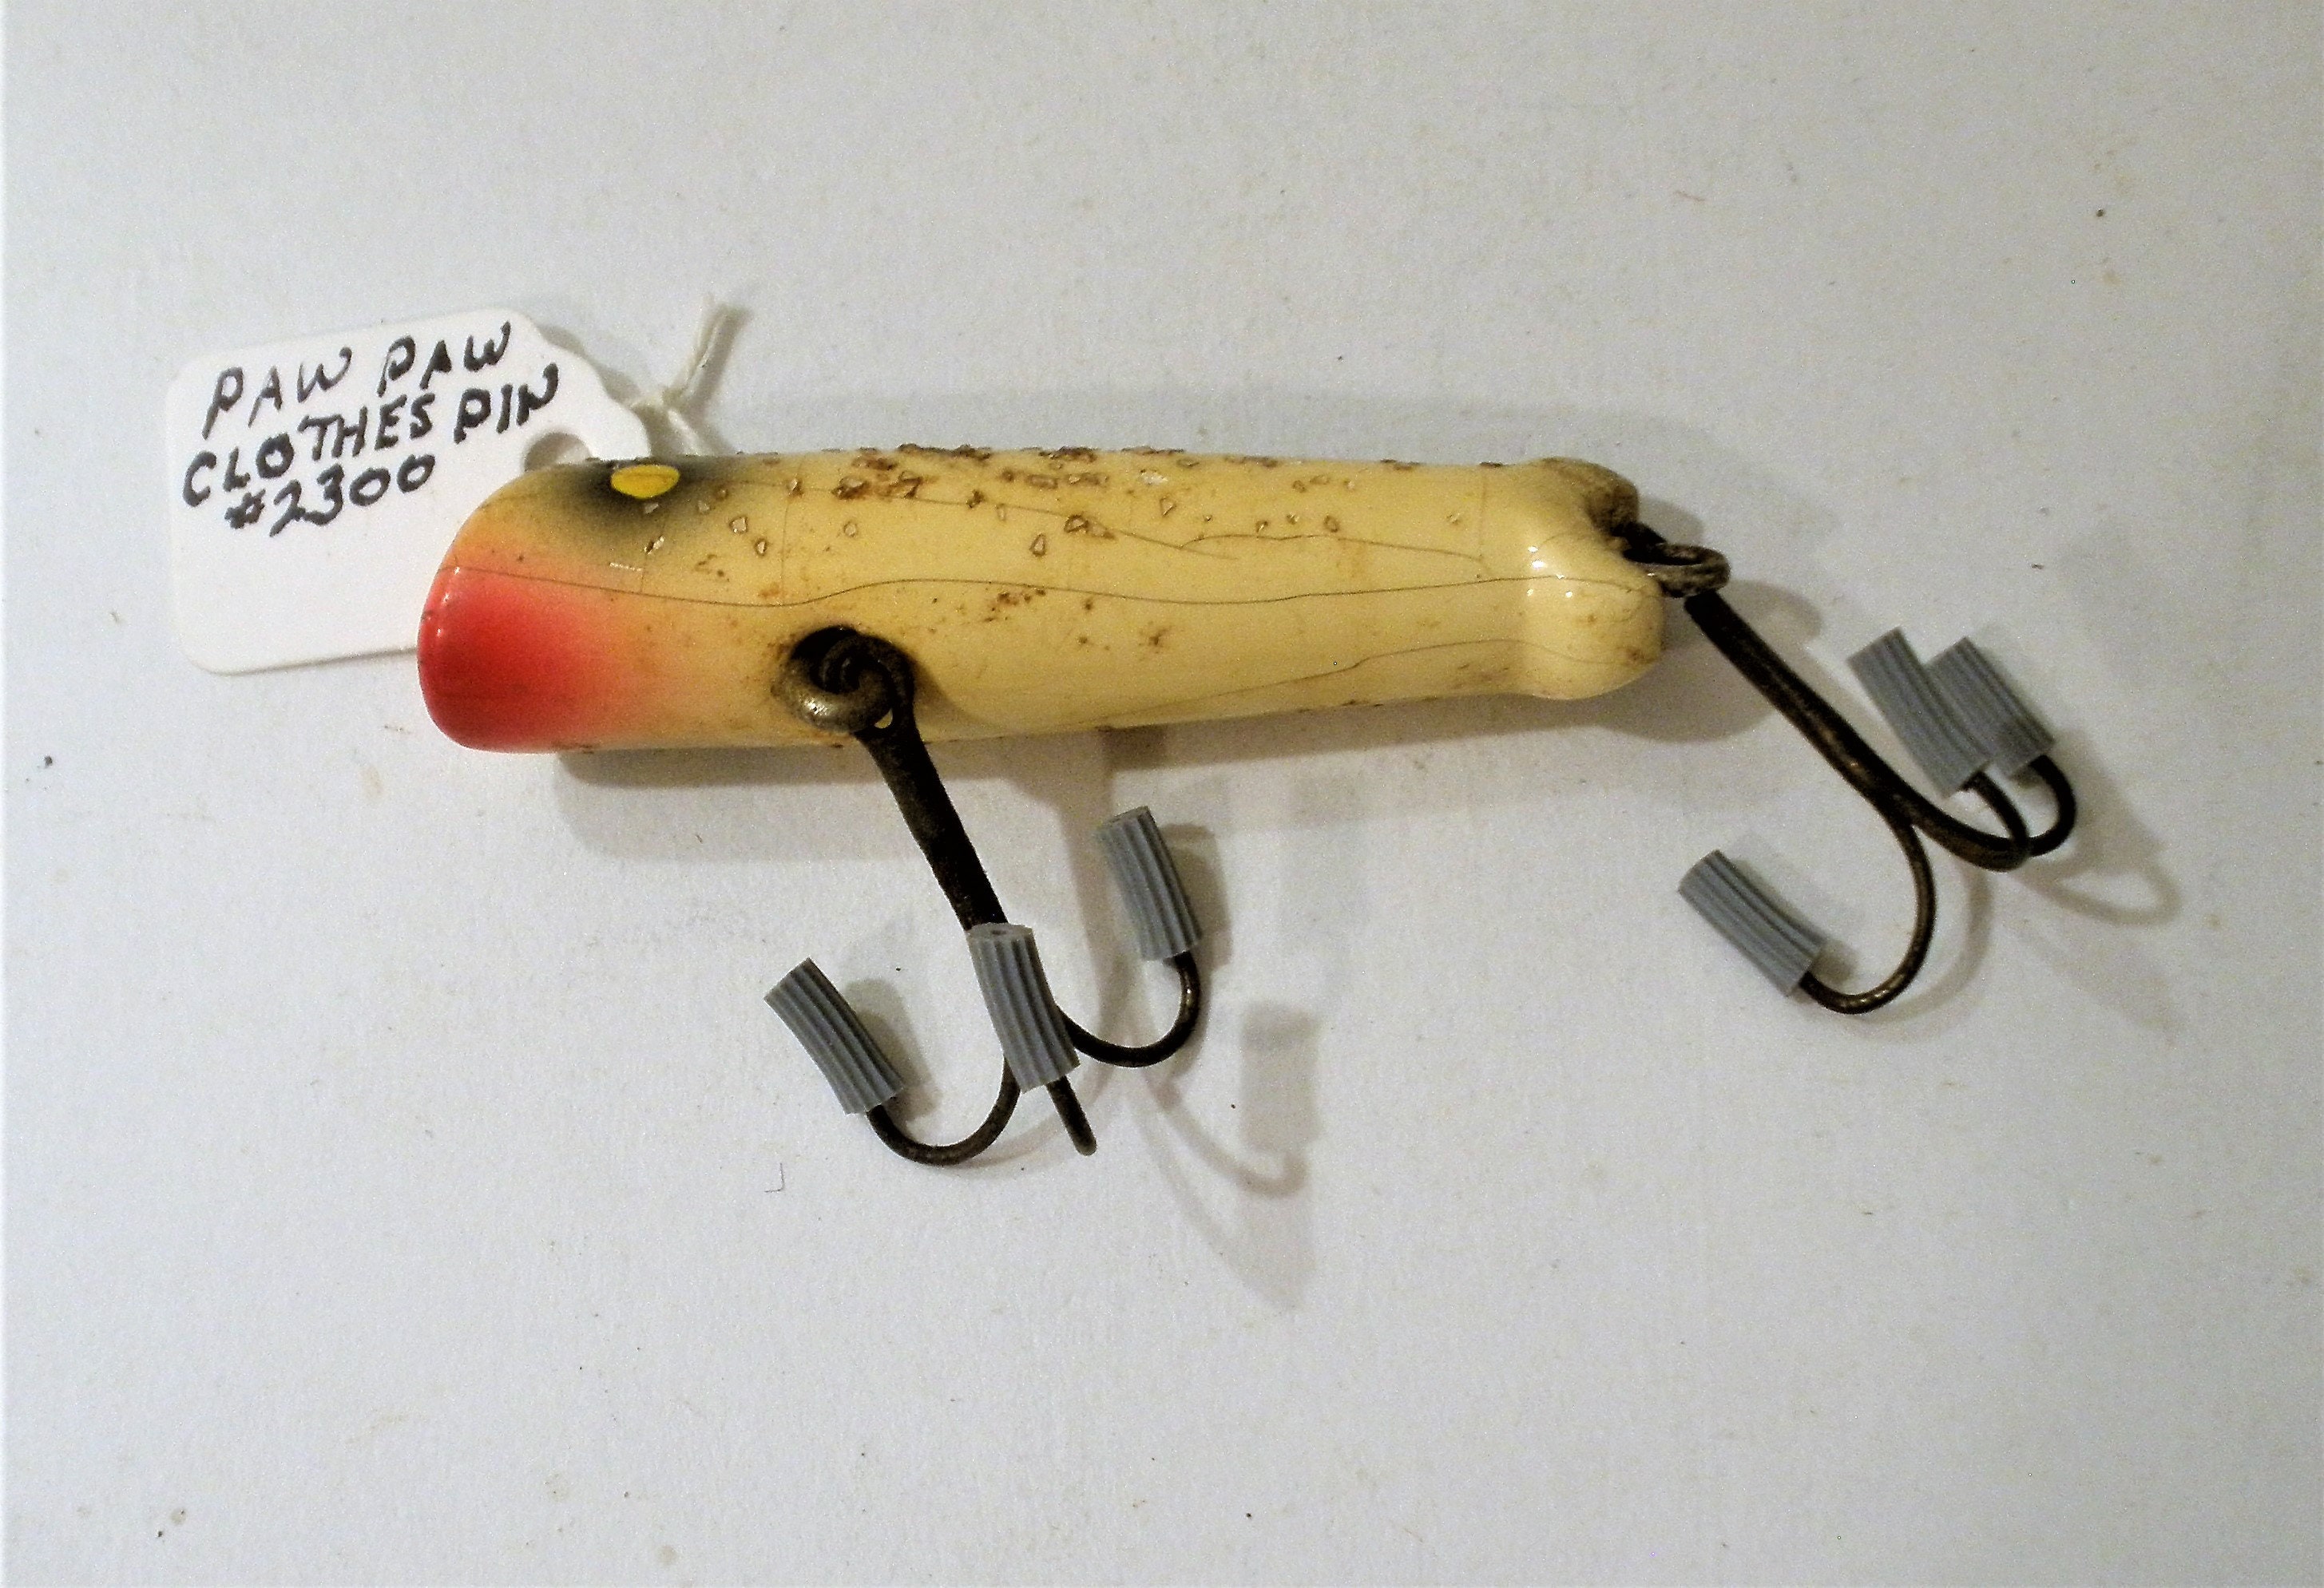 Vintage Paw Paw Lure / 2300M Clothes Pin Lure / Issued 1940 / Wood Lure /  All Original / Nice Lure / Collectible / Great Gift Items 